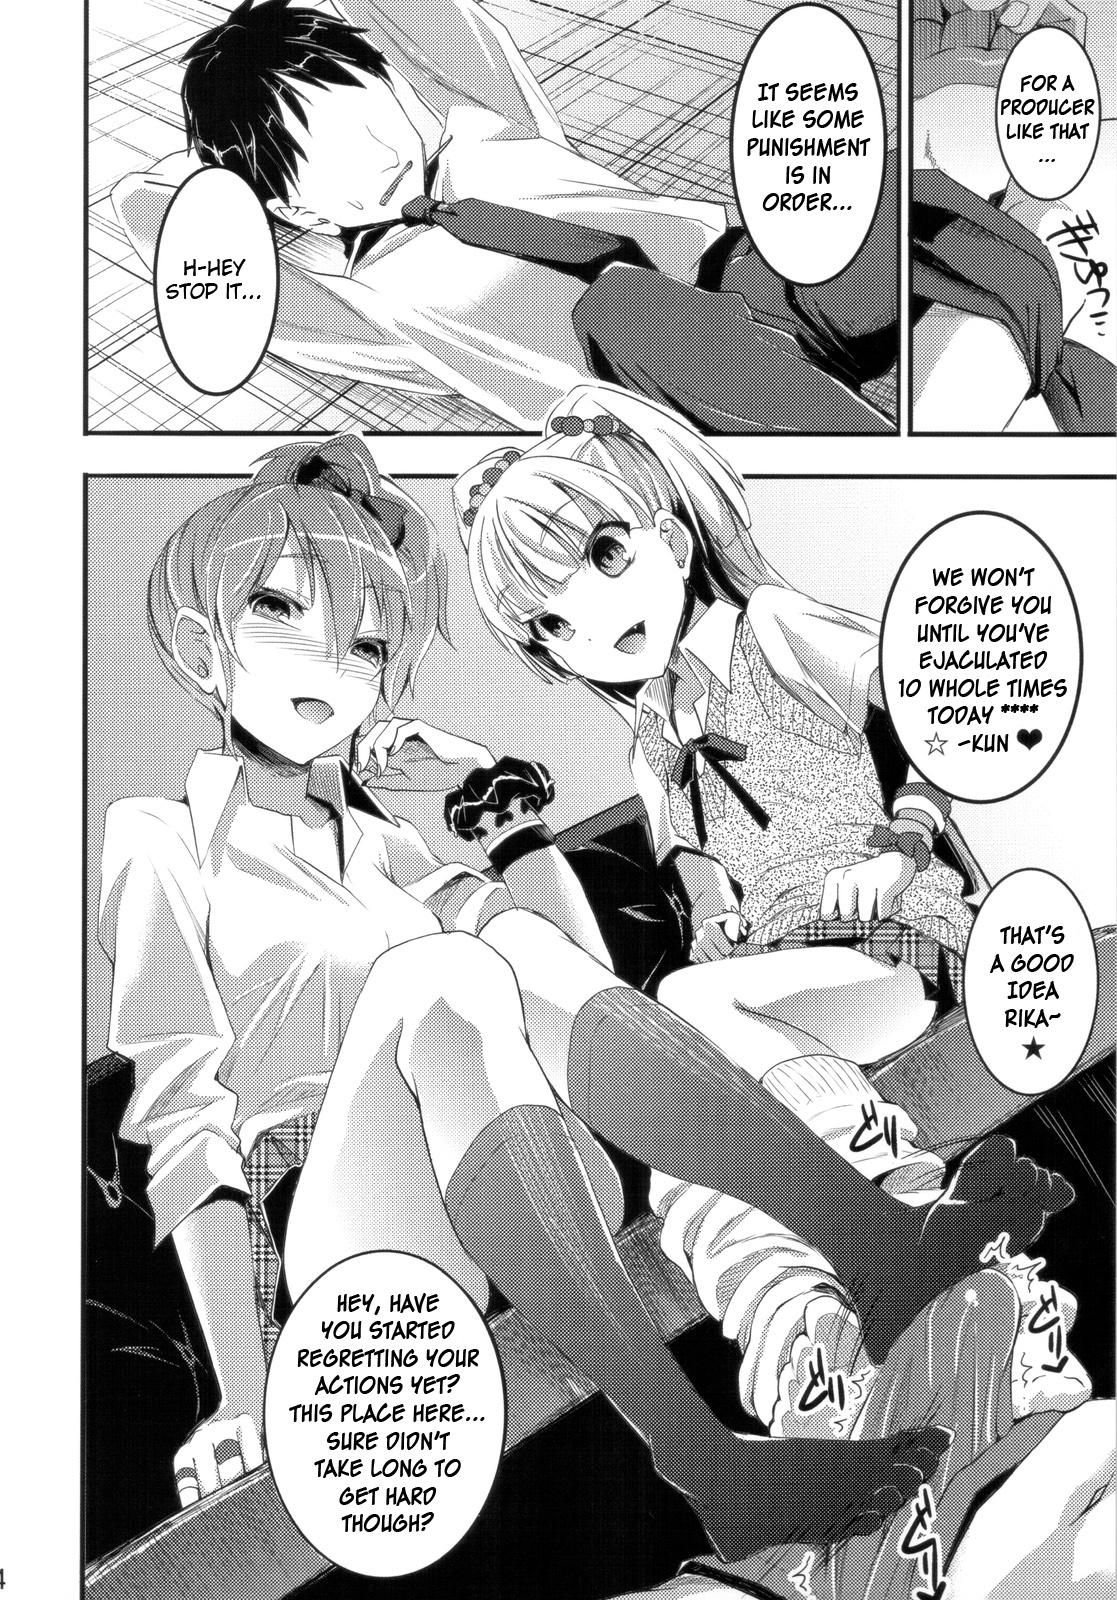 The Jougasaki Sisters' All-out Love Attack + Omake 3